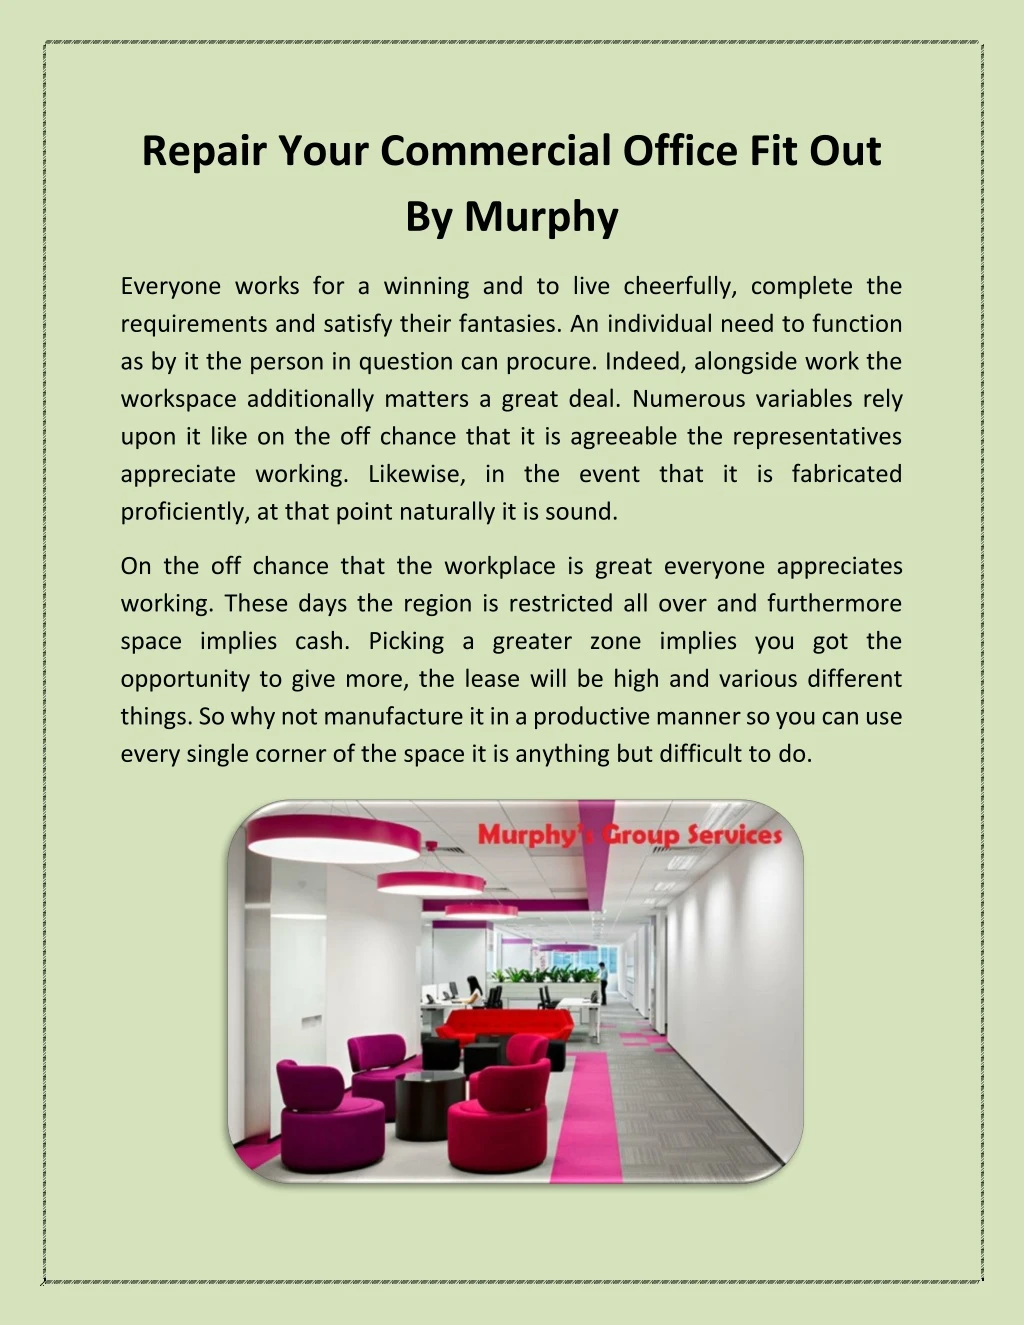 repair your commercial office fit out by murphy